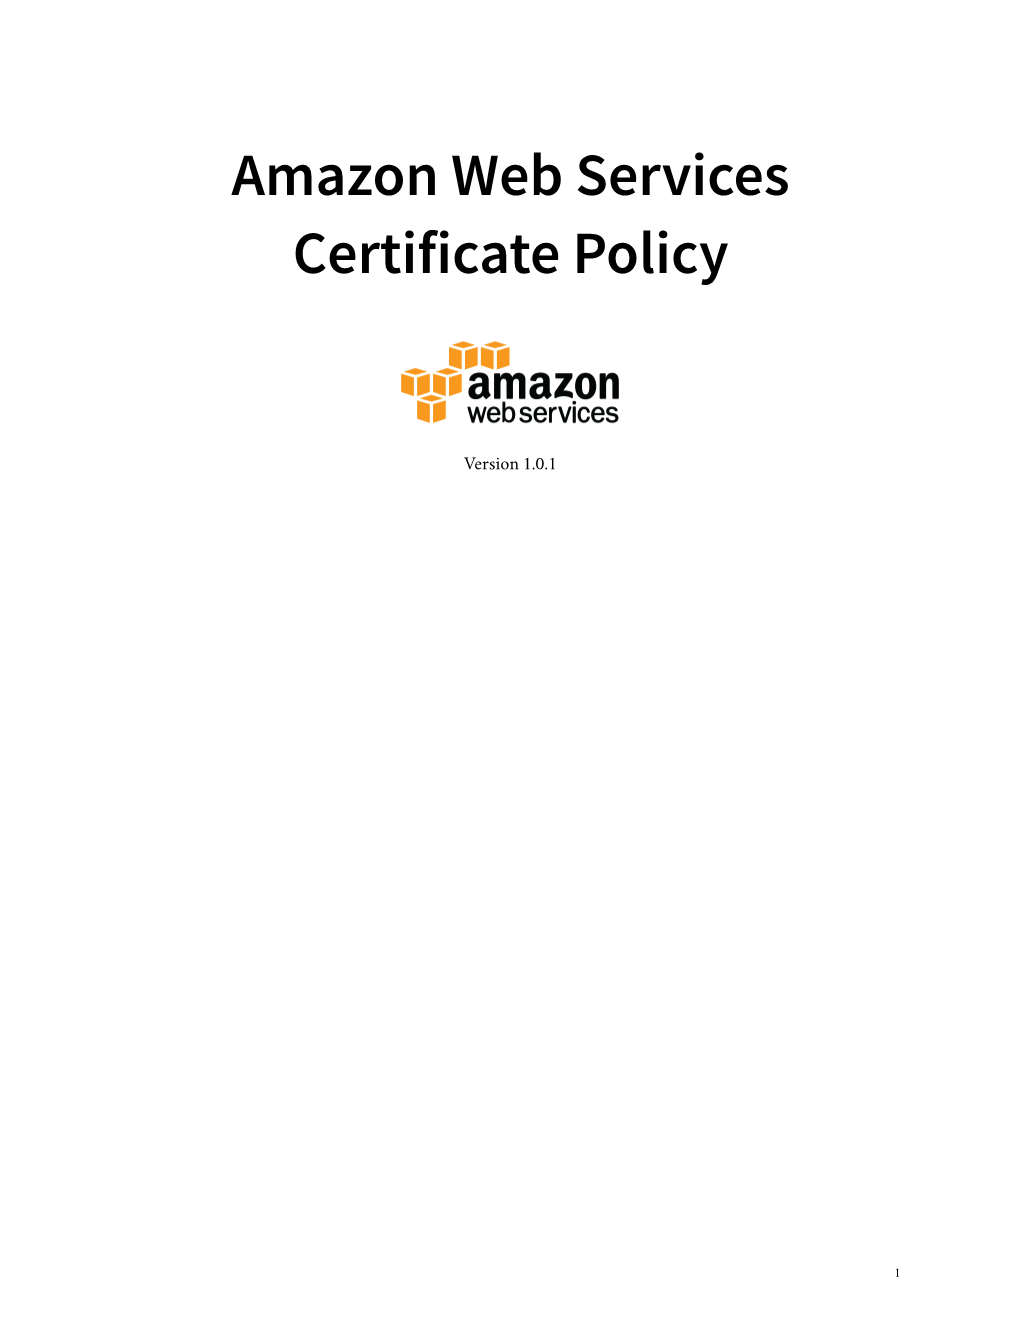 Amazon Web Services Certificate Policy